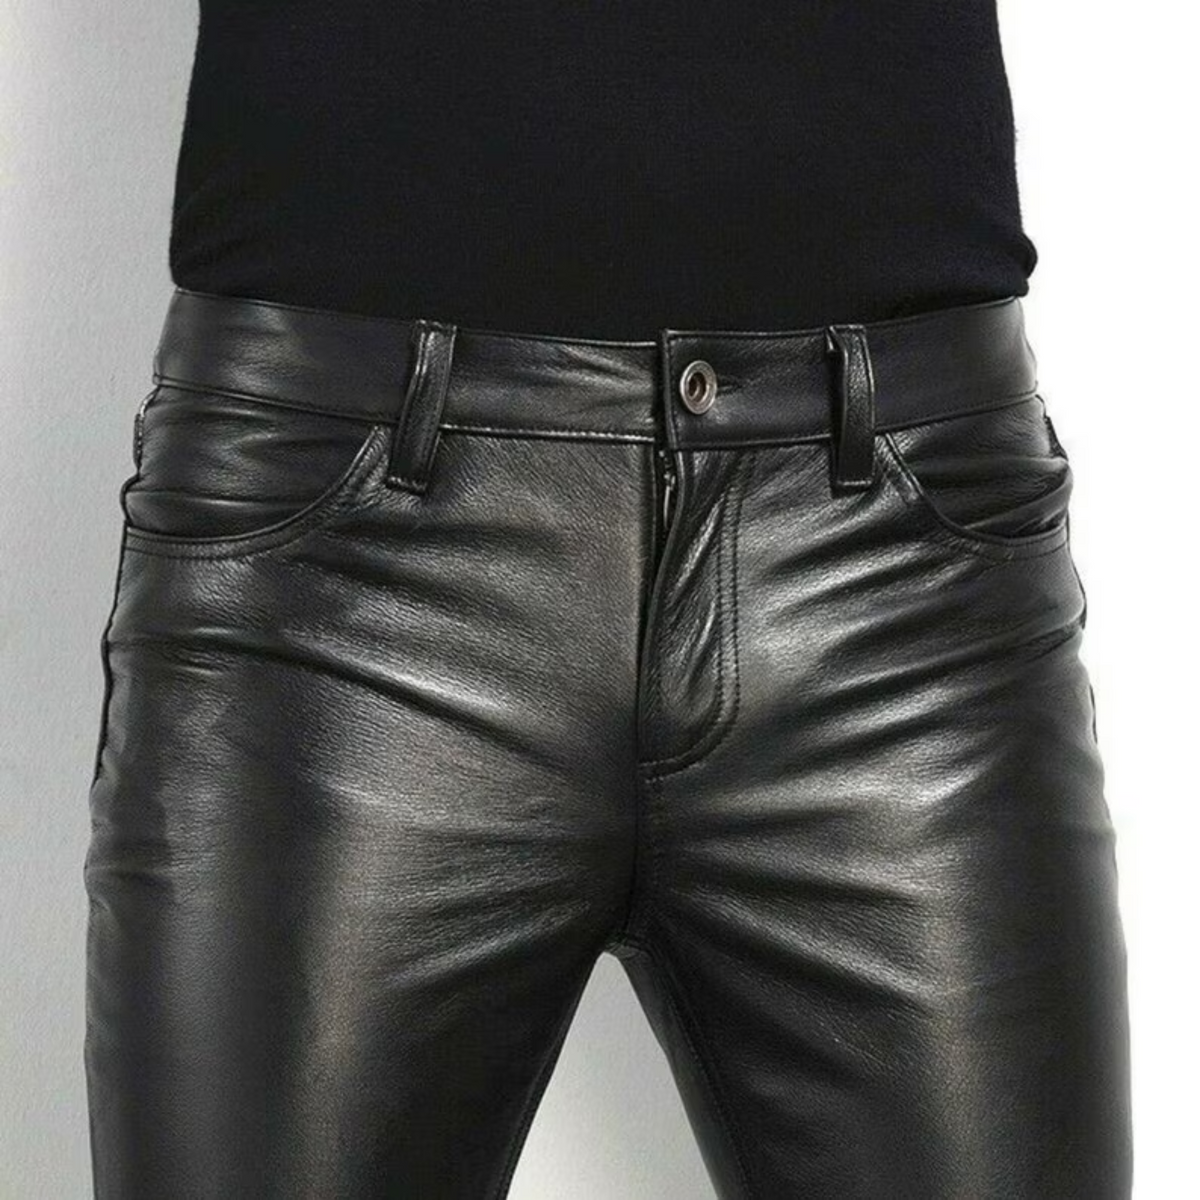 Men's Genuine Sheep Leather Party Pants Slim Fit Leather Pants Classic –  1XpressionS